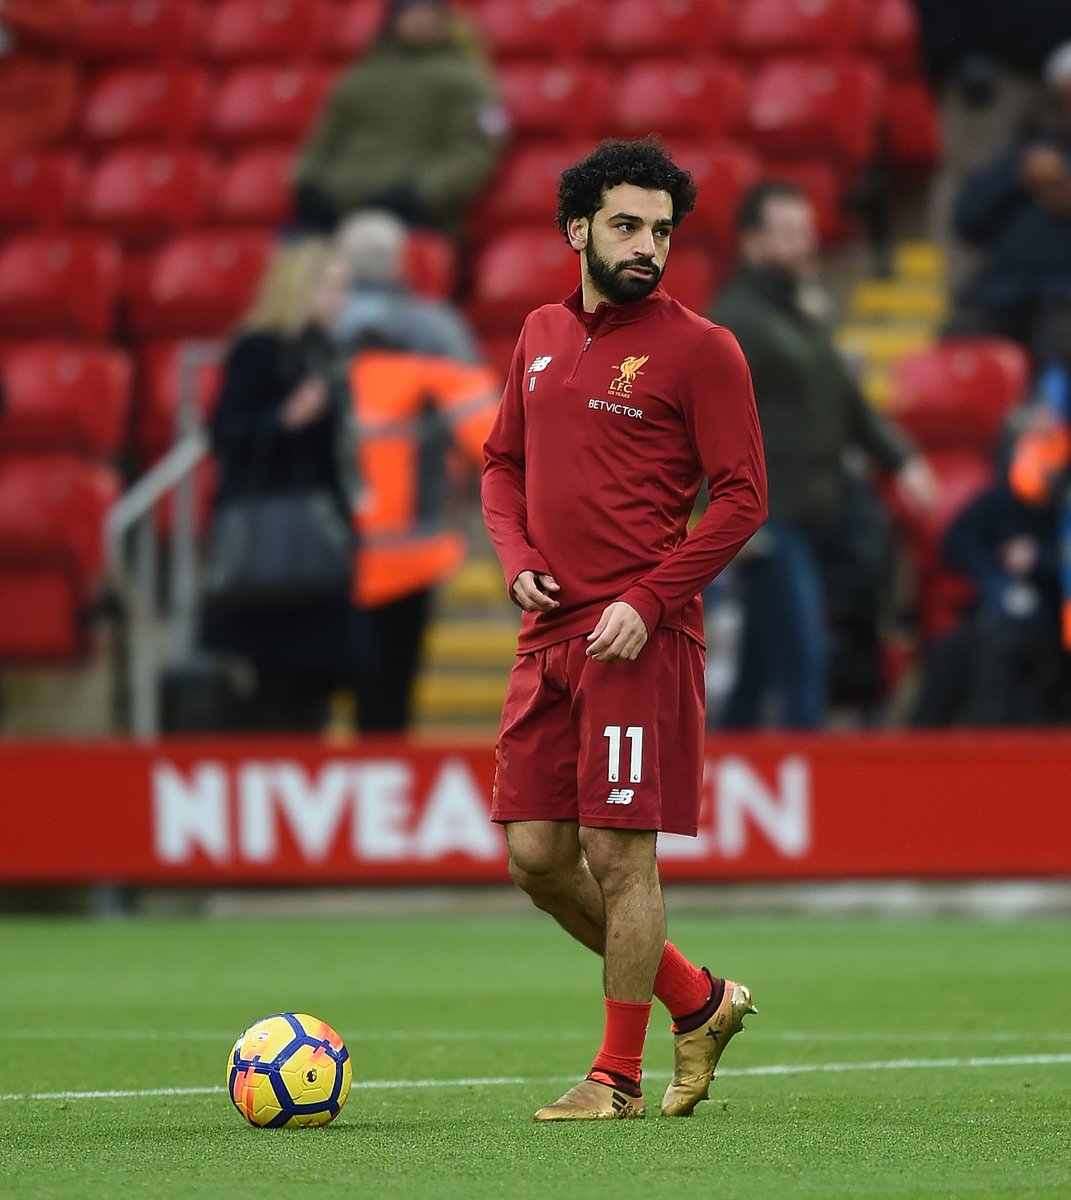 Mohamed Salah's not happy with international exit but everything will work out for Liverpool, insists Jurgen Klopp